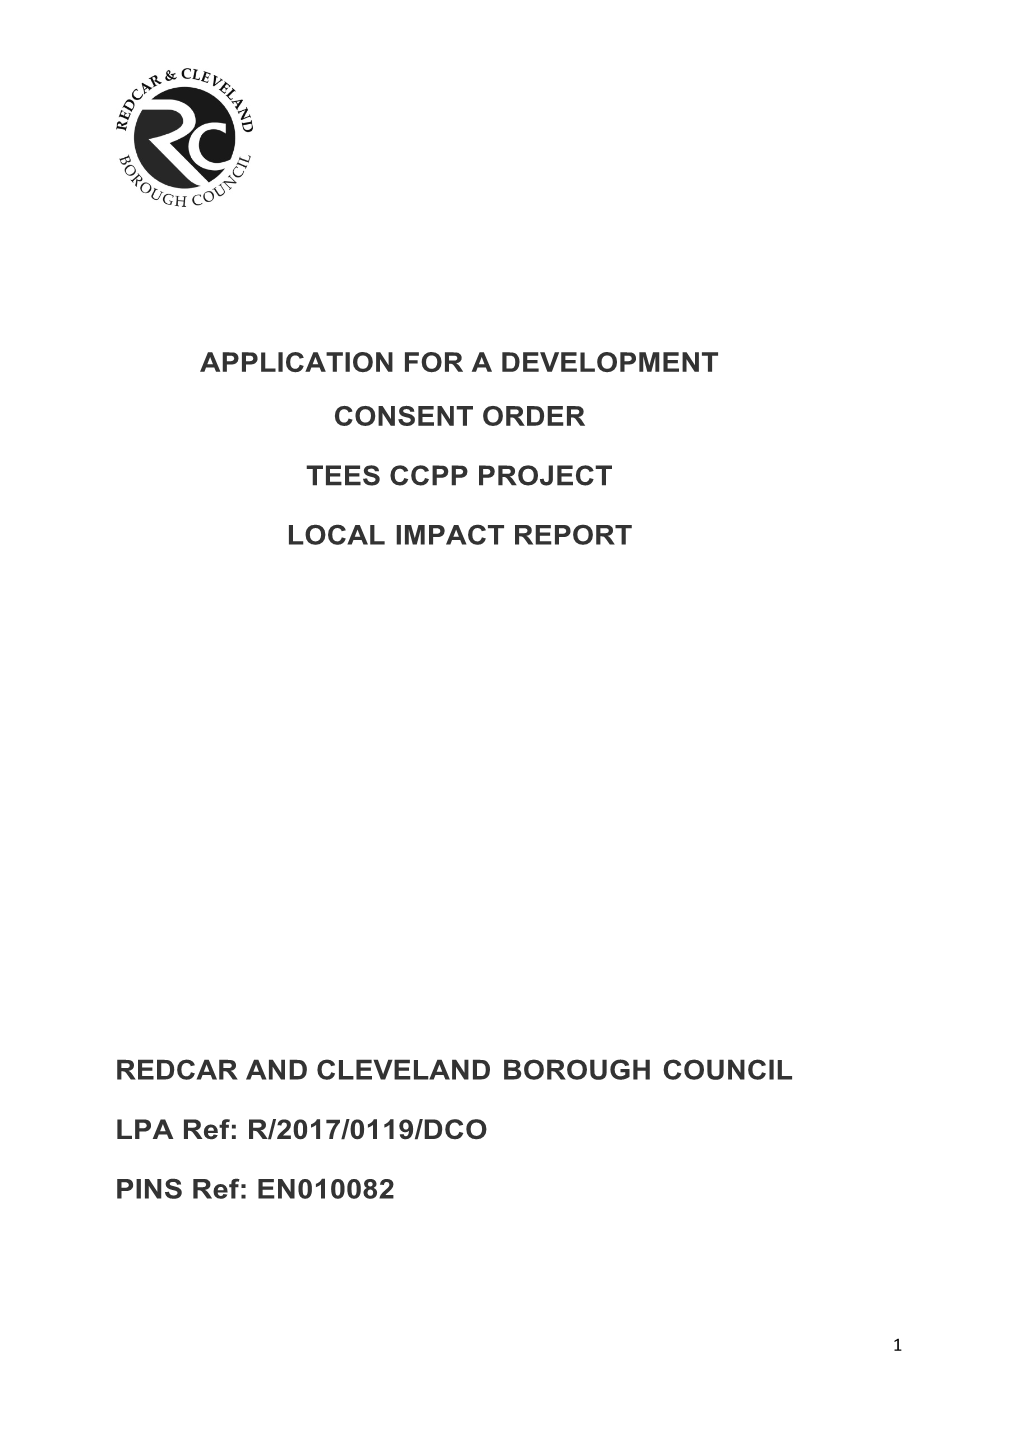 Application for a Development Consent Order